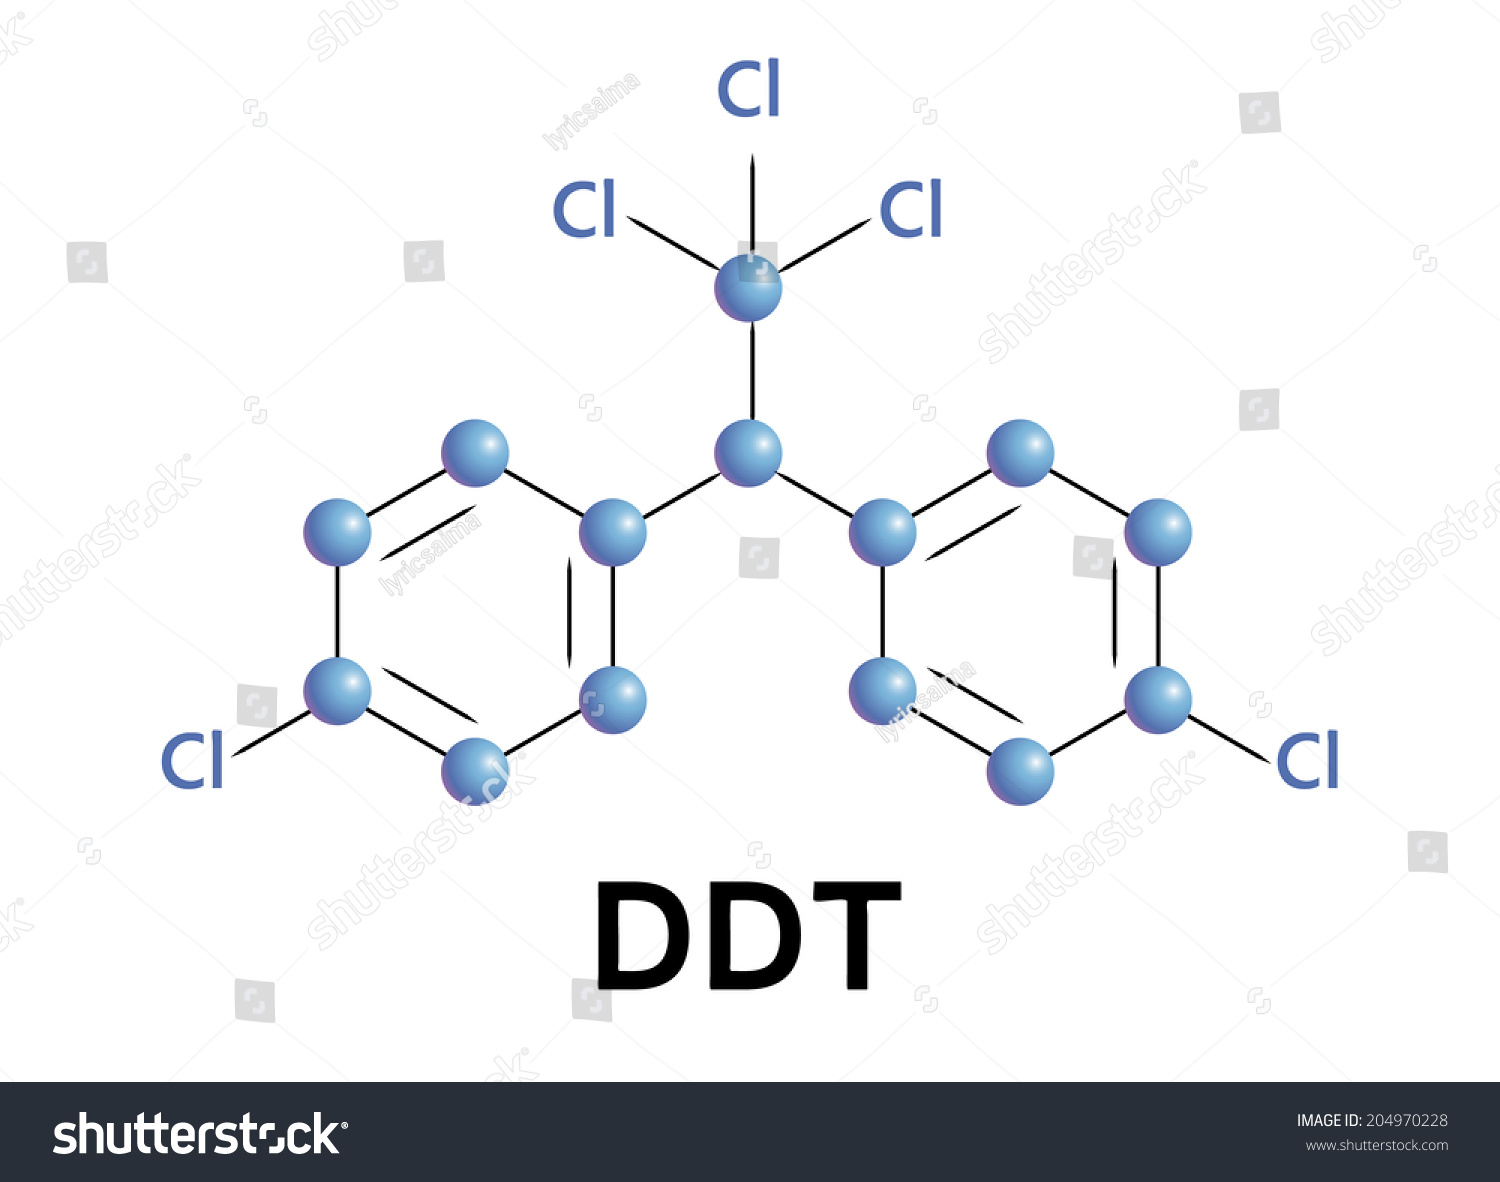 Ddt Stock Vector Images - Alamy